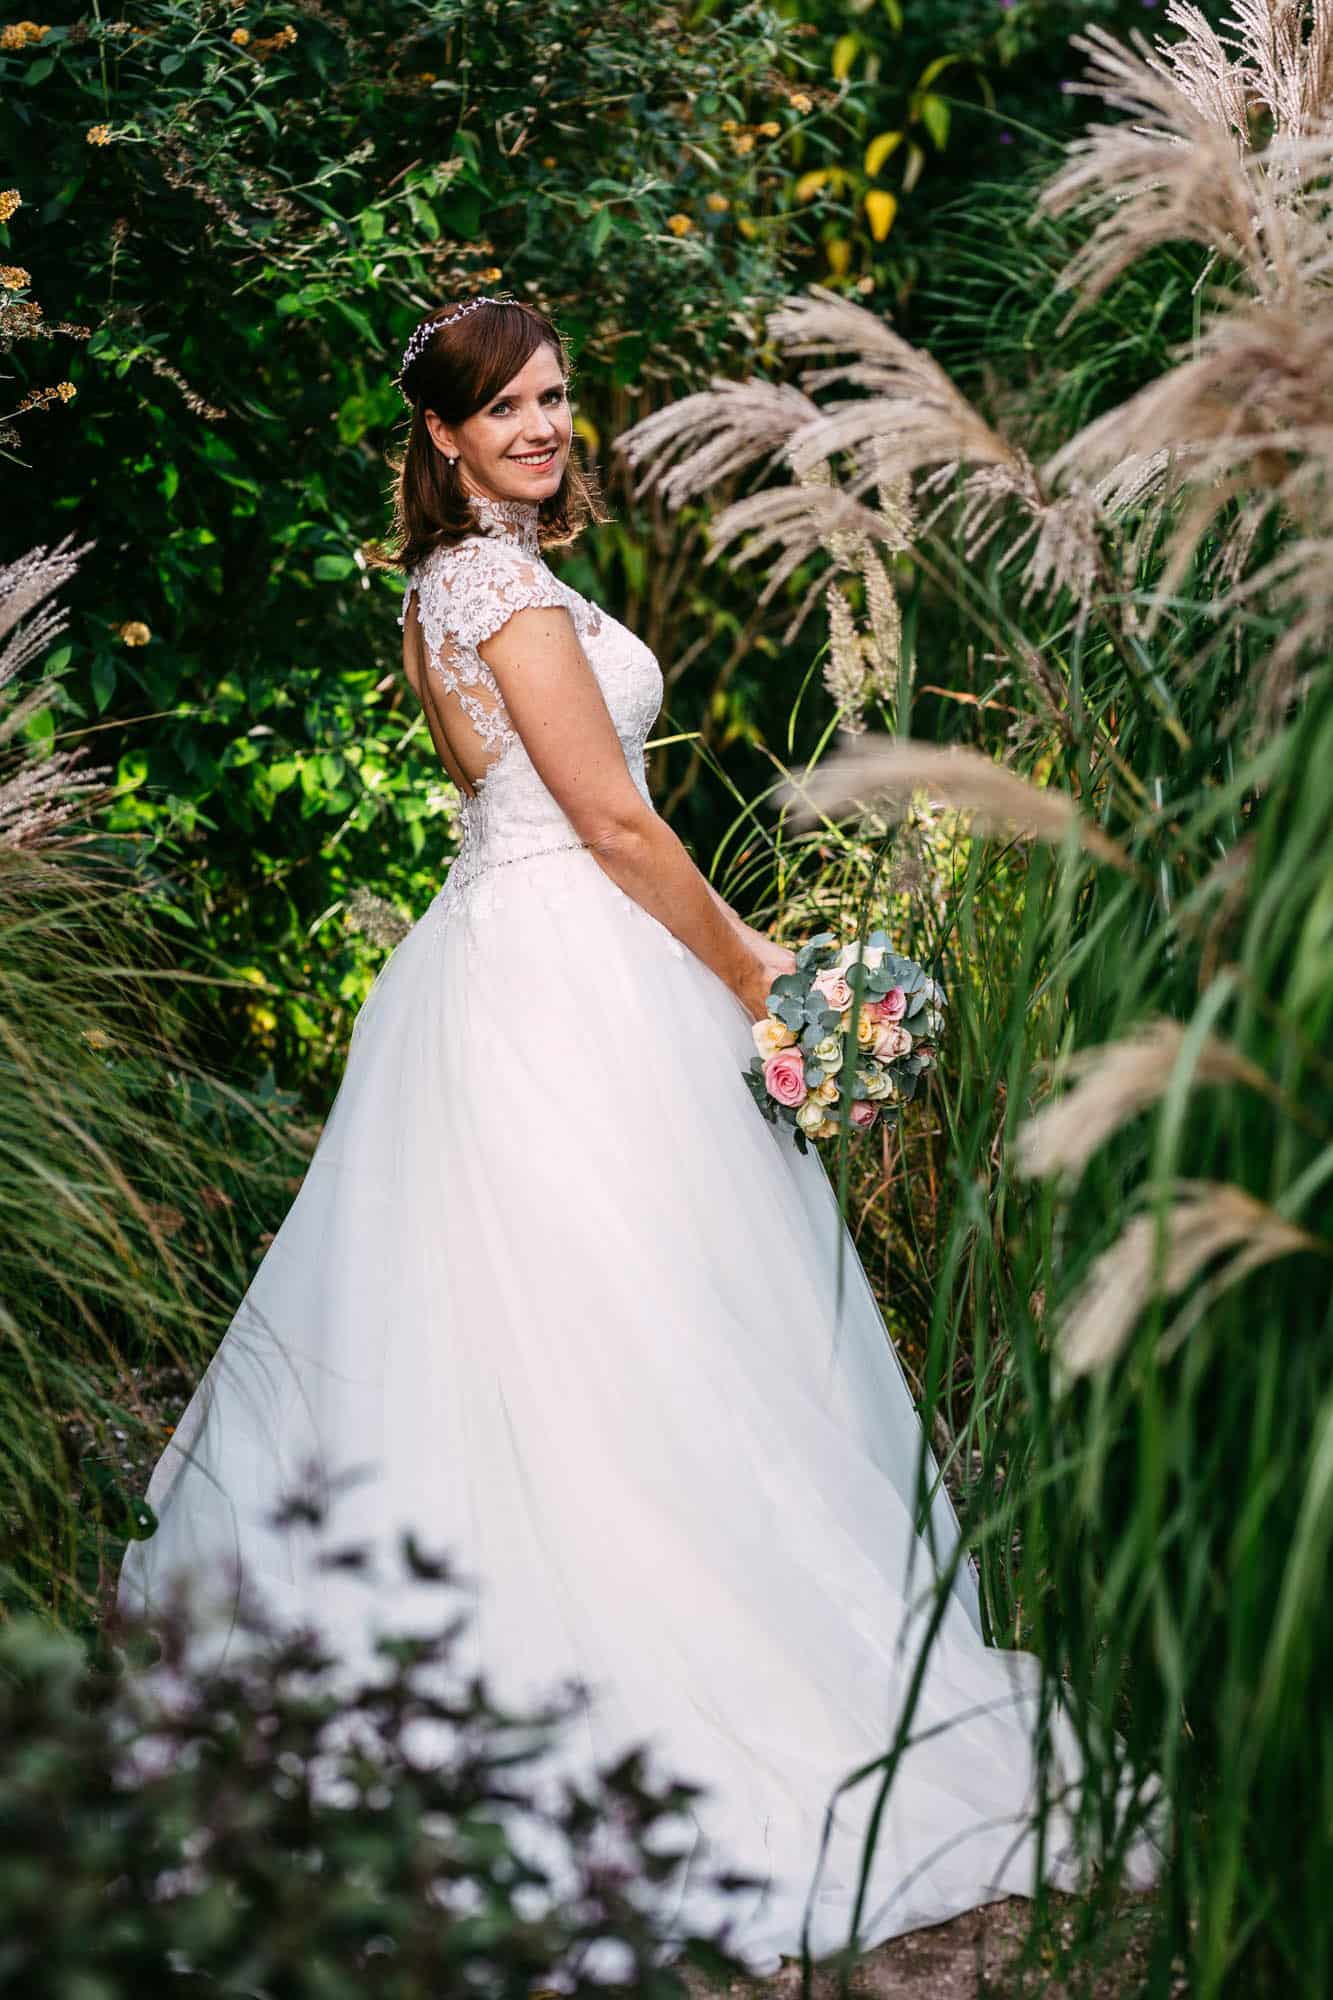 A bride in an A-line wedding dress, standing in a garden with tall reeds.